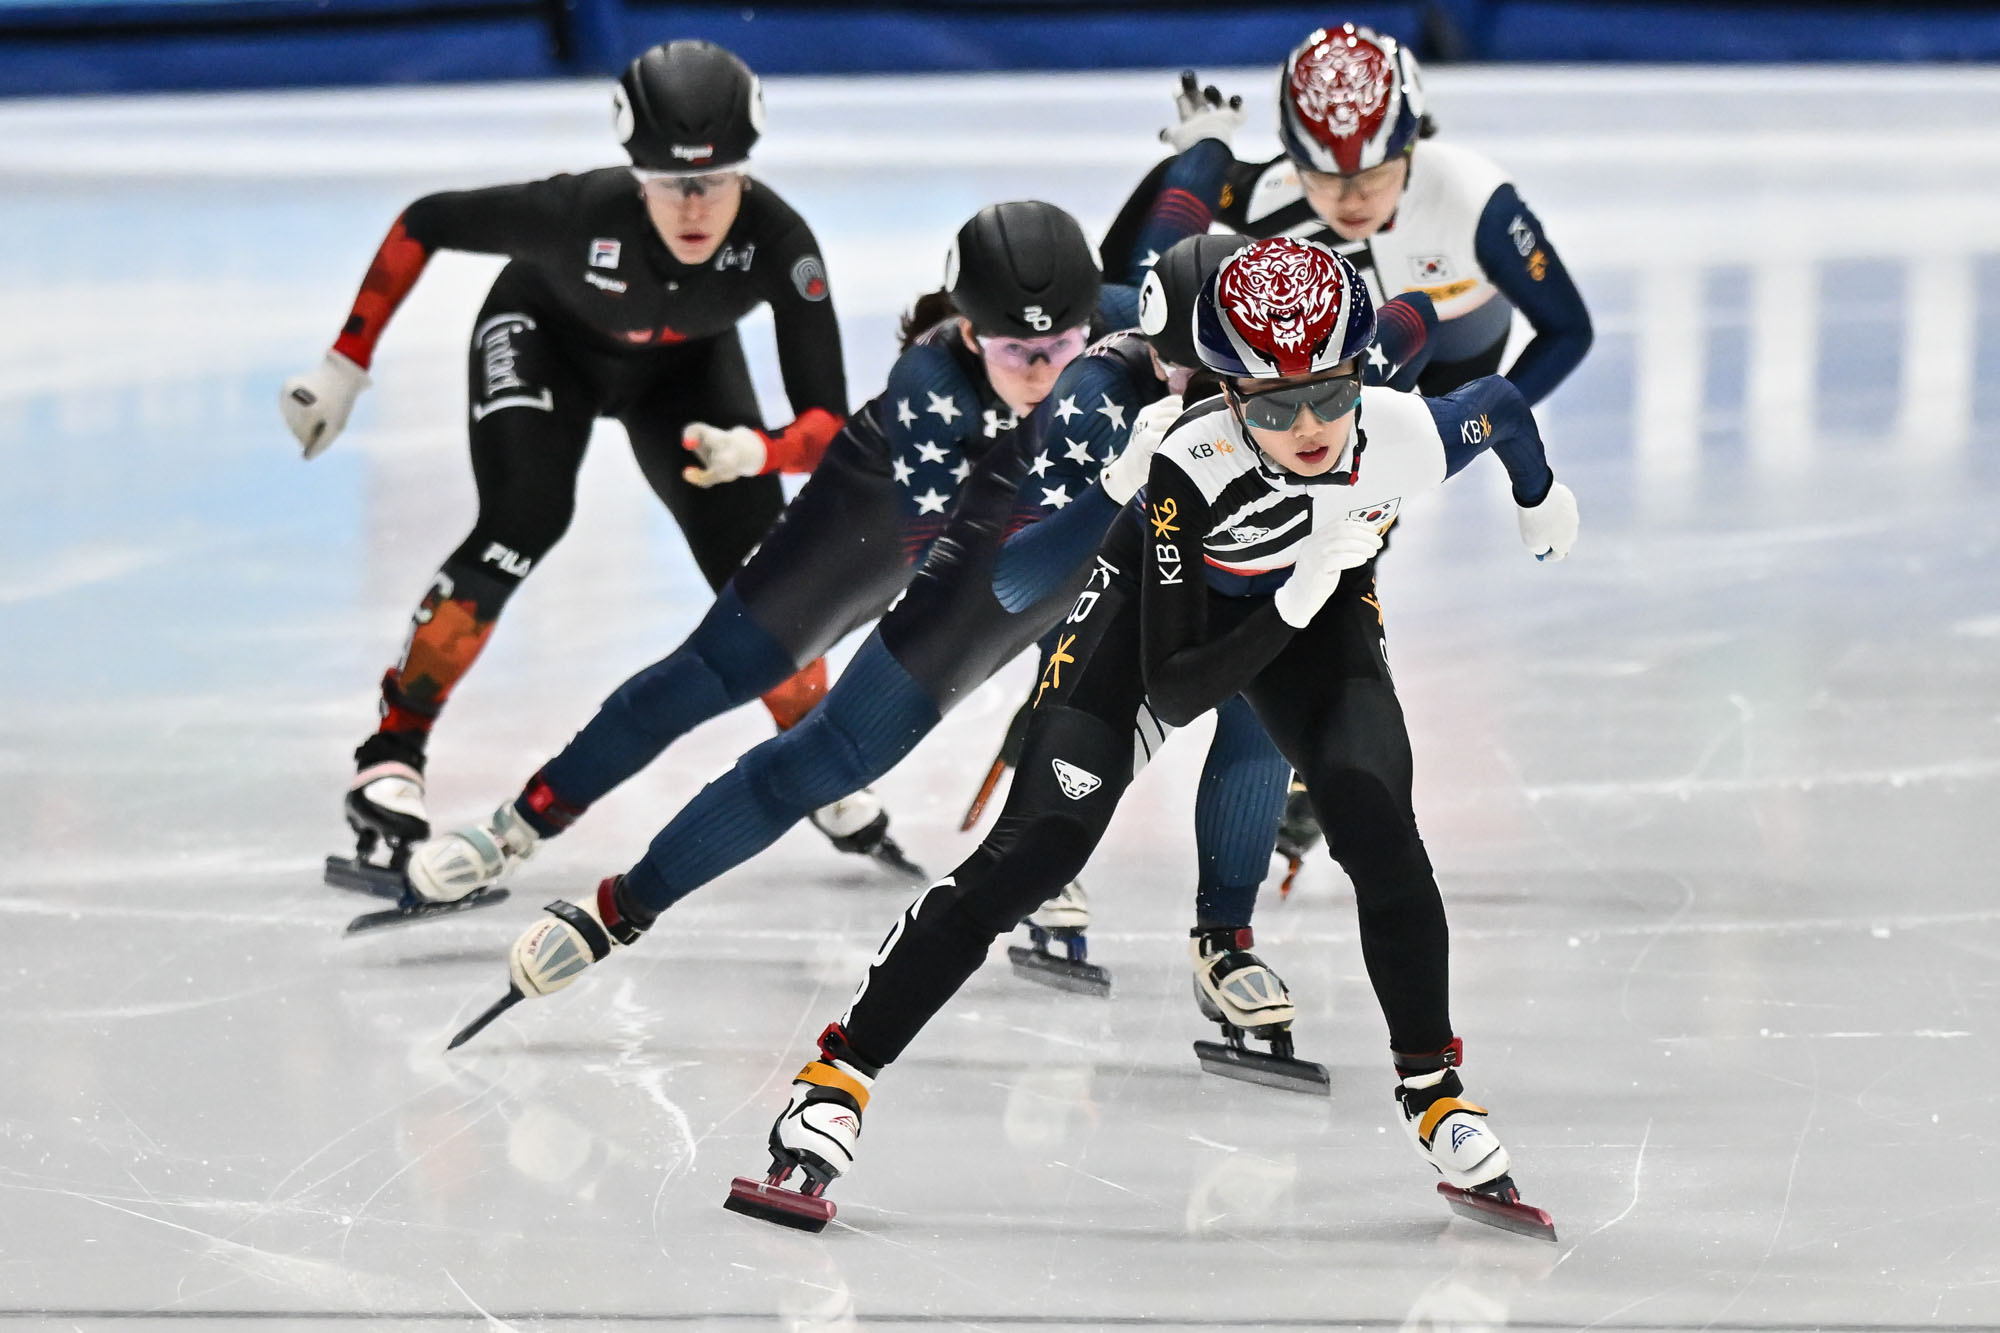 LAVAL, CANADA - NOVEMBER 04:  Park Jiwon  of the Republic of Korea competes in the women’s 500 m final during the ISU Four Continents Short Track Speed Skating Championships at Place Bell on November 4, 2023 in Laval, Quebec, Canada.  (Photo by Minas Panagiotakis - International Skating Union/International Skating Union via Getty Images)